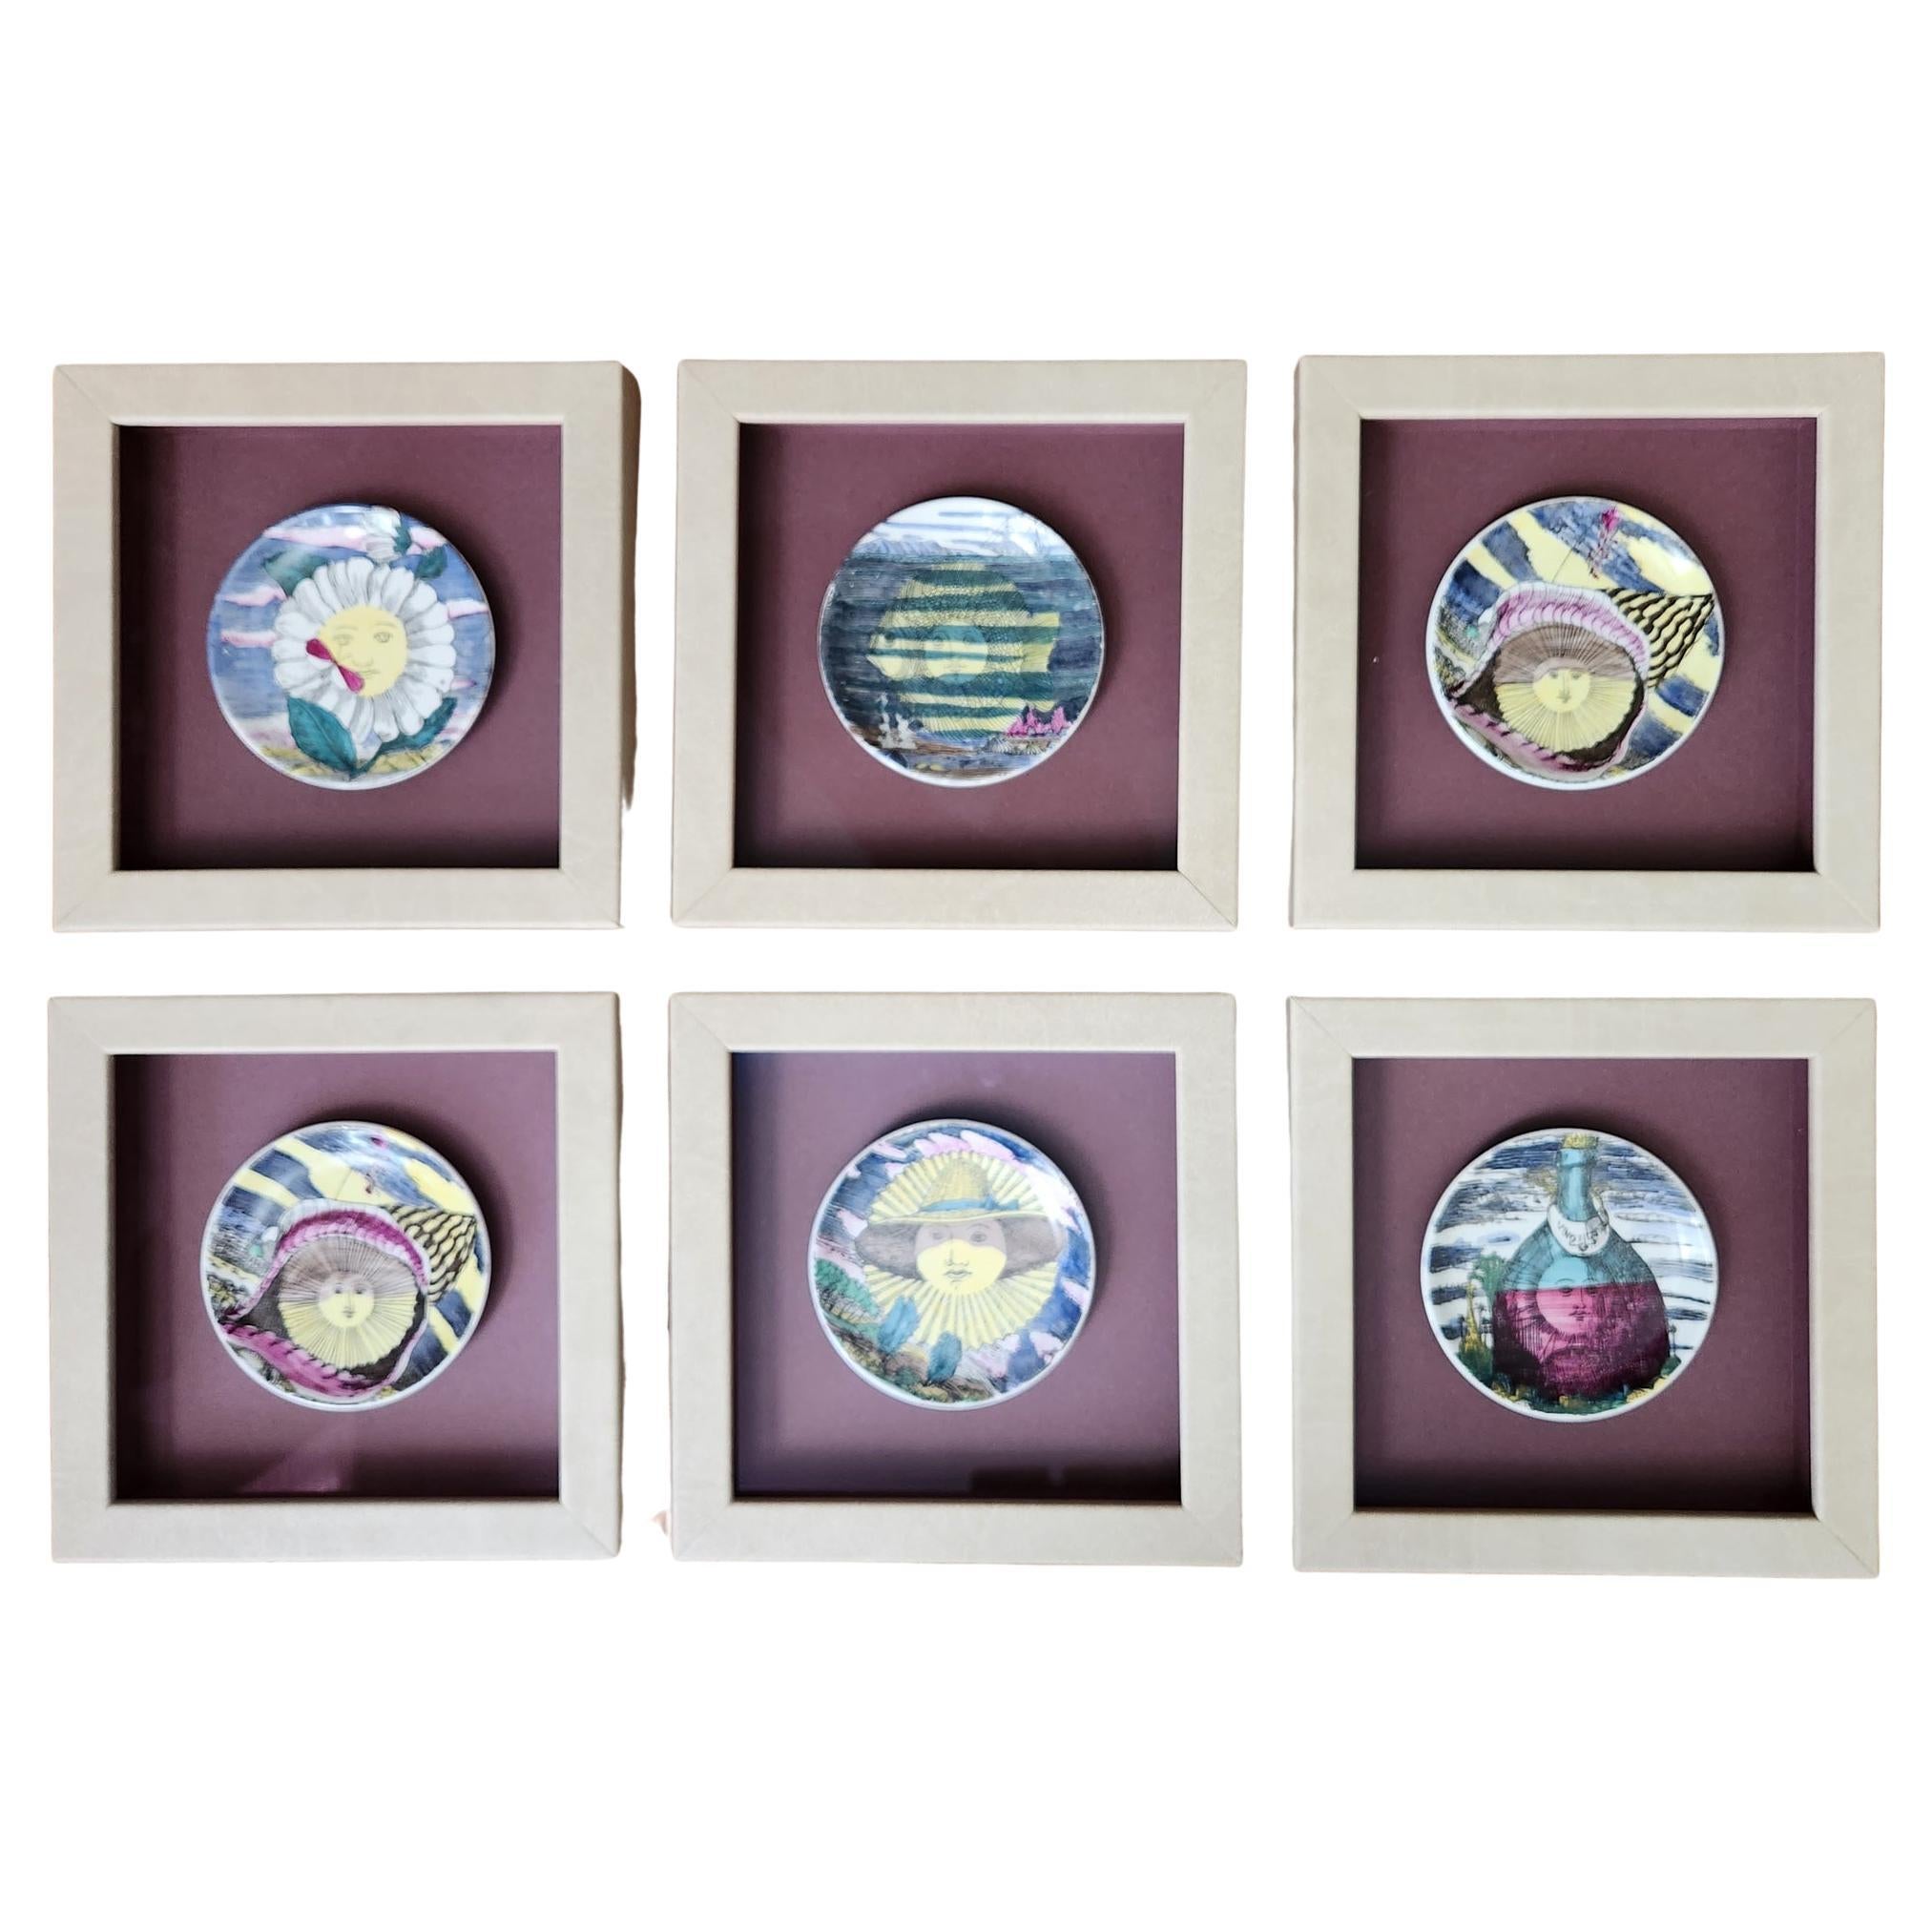 Piero Fornasetti Framed Set of Coasters of the Months, "12 Mesi, 12 Soli" design For Sale